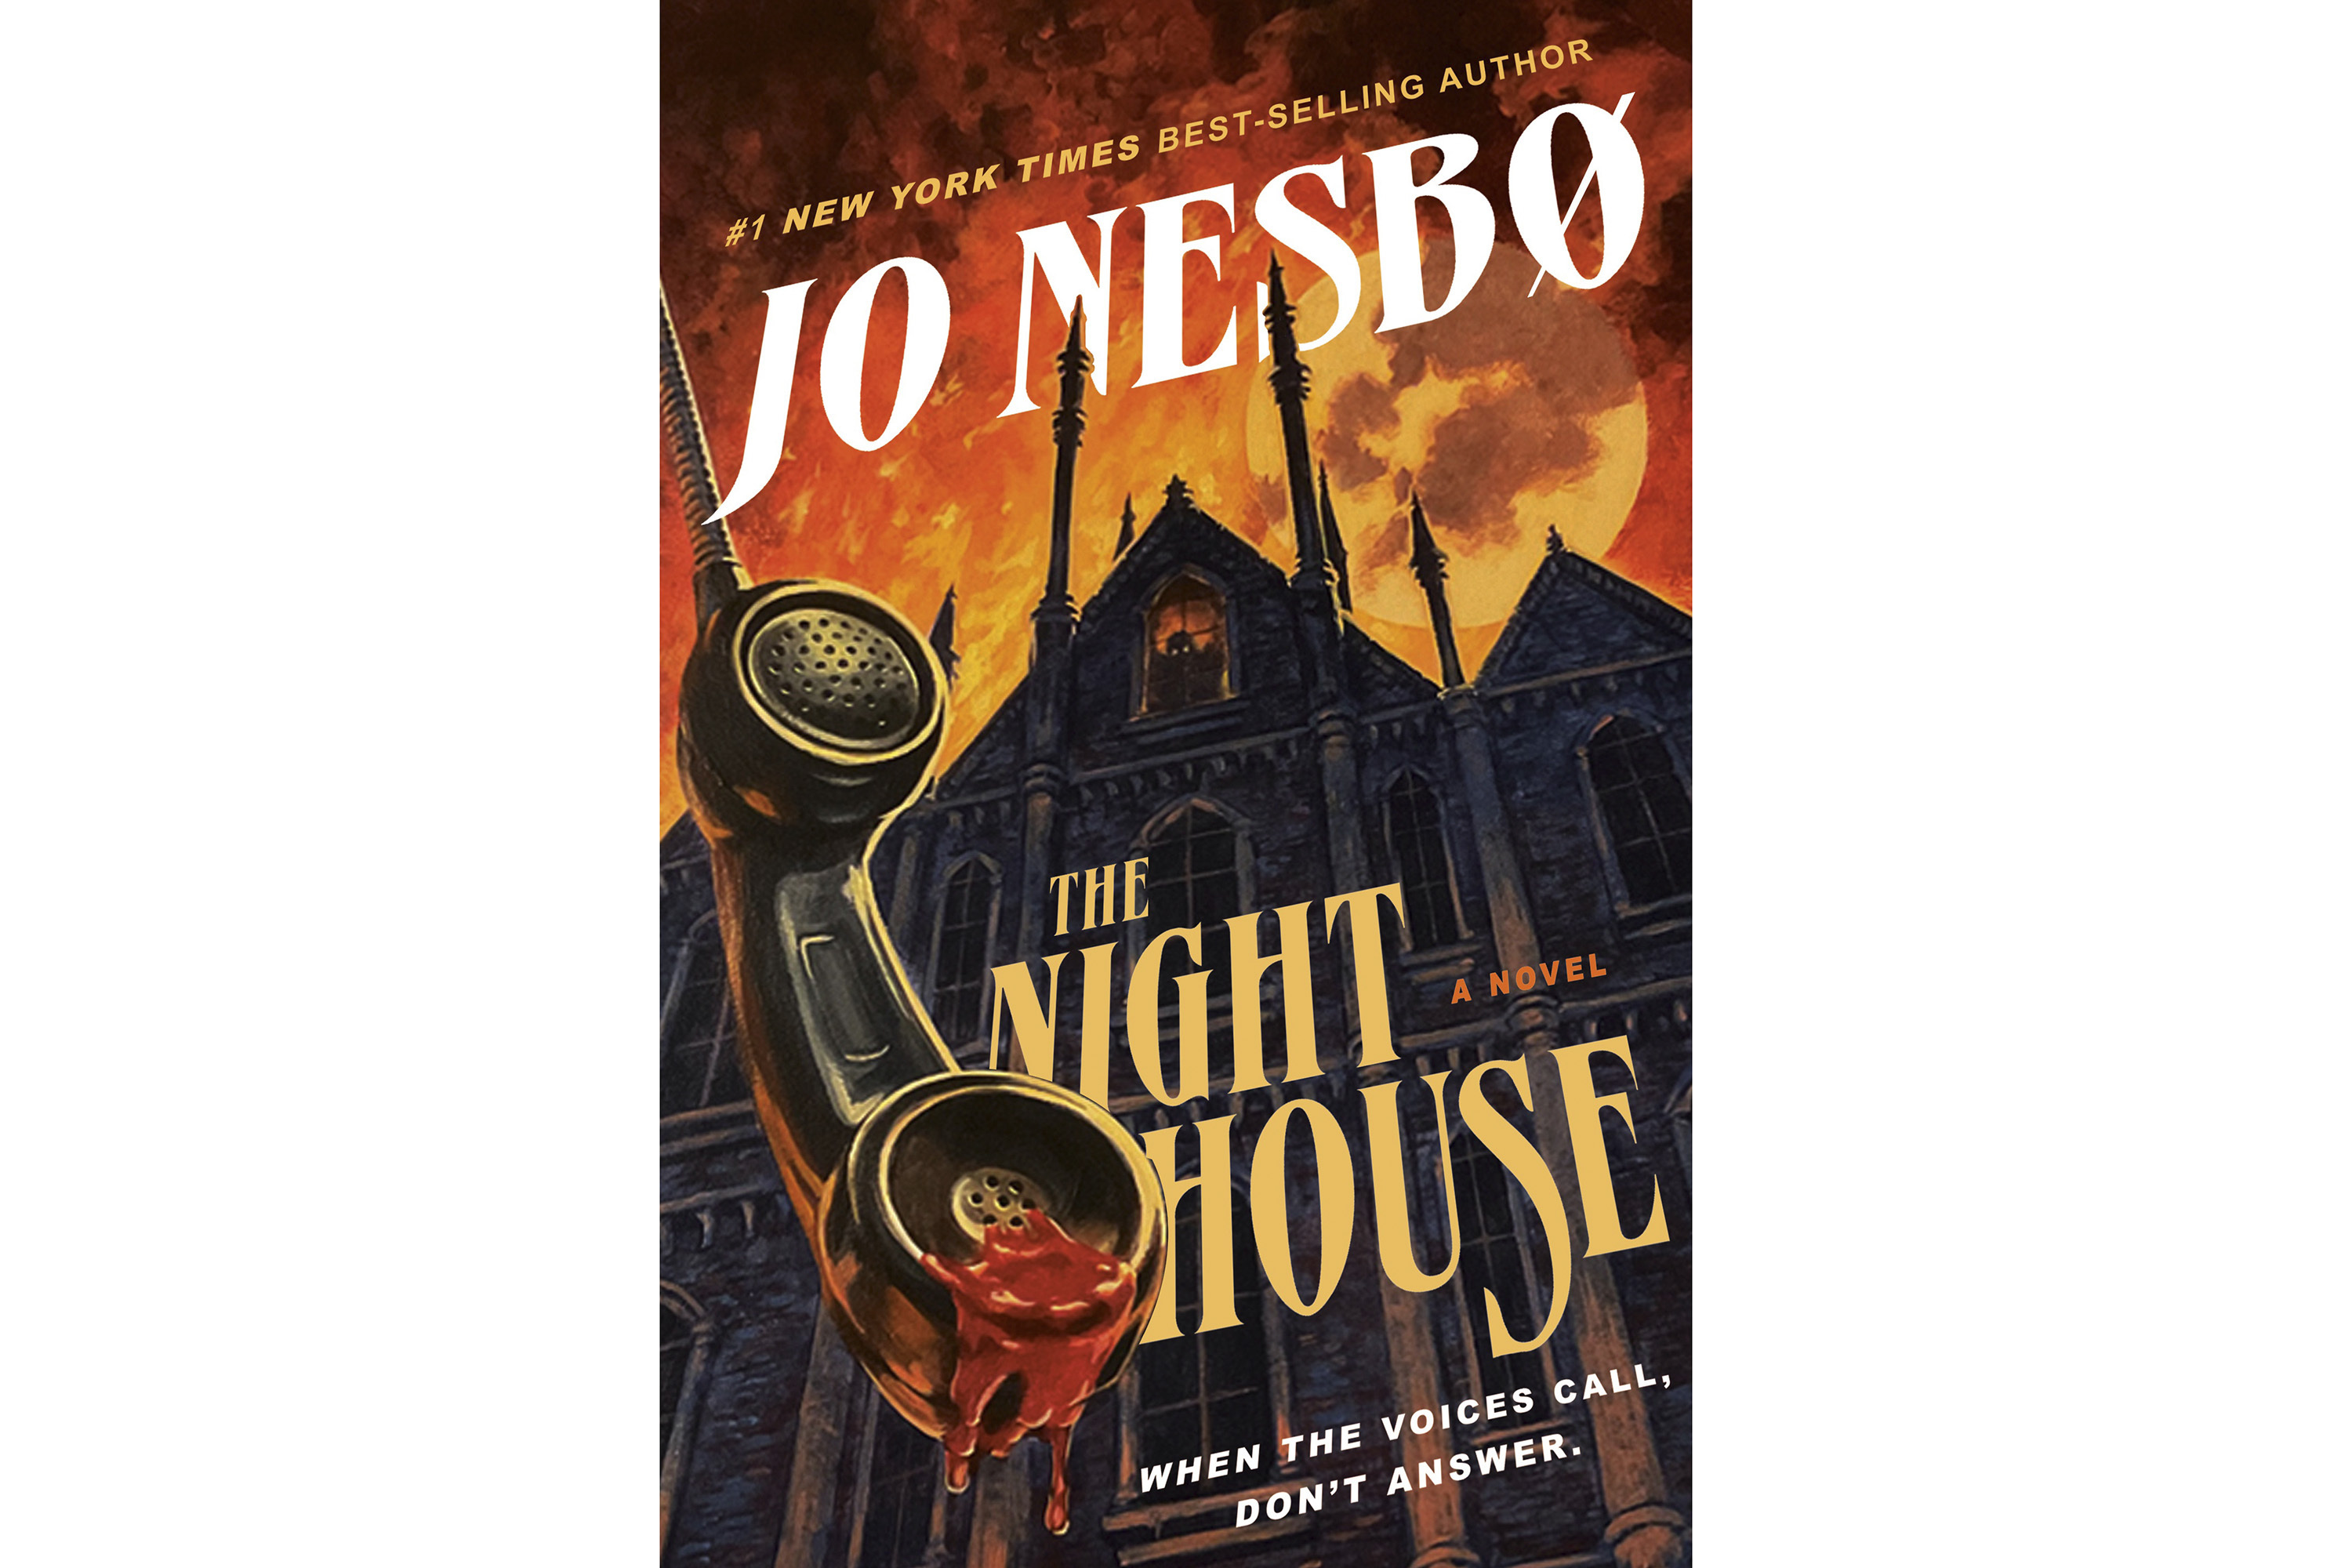 Jo Nesbo, Official Publisher Page